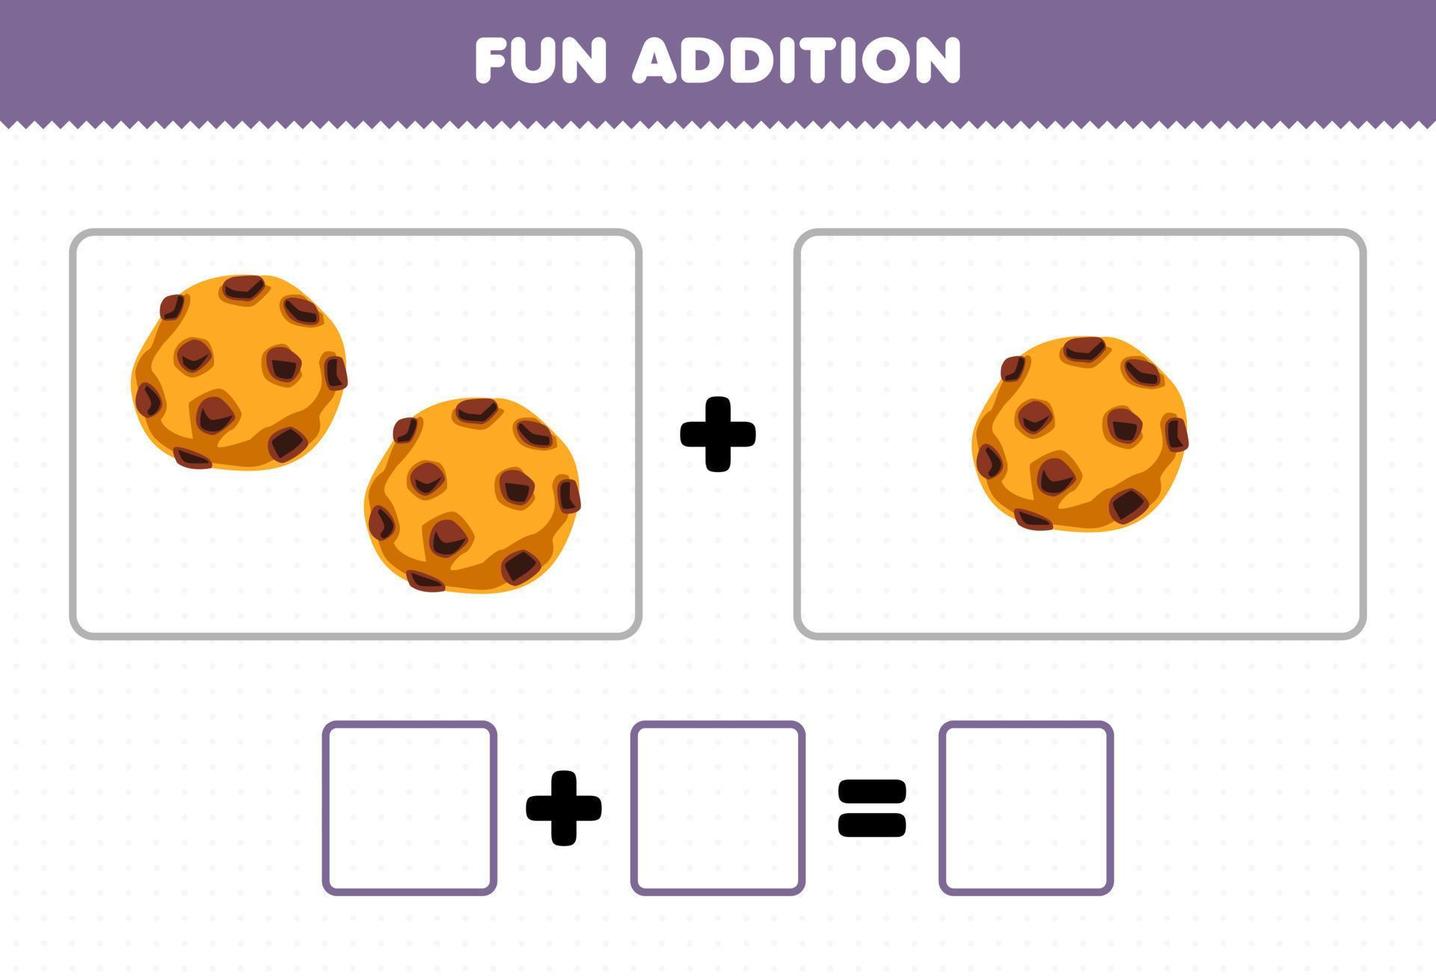 Education game for children fun addition by counting cartoon food cookie pictures worksheet vector